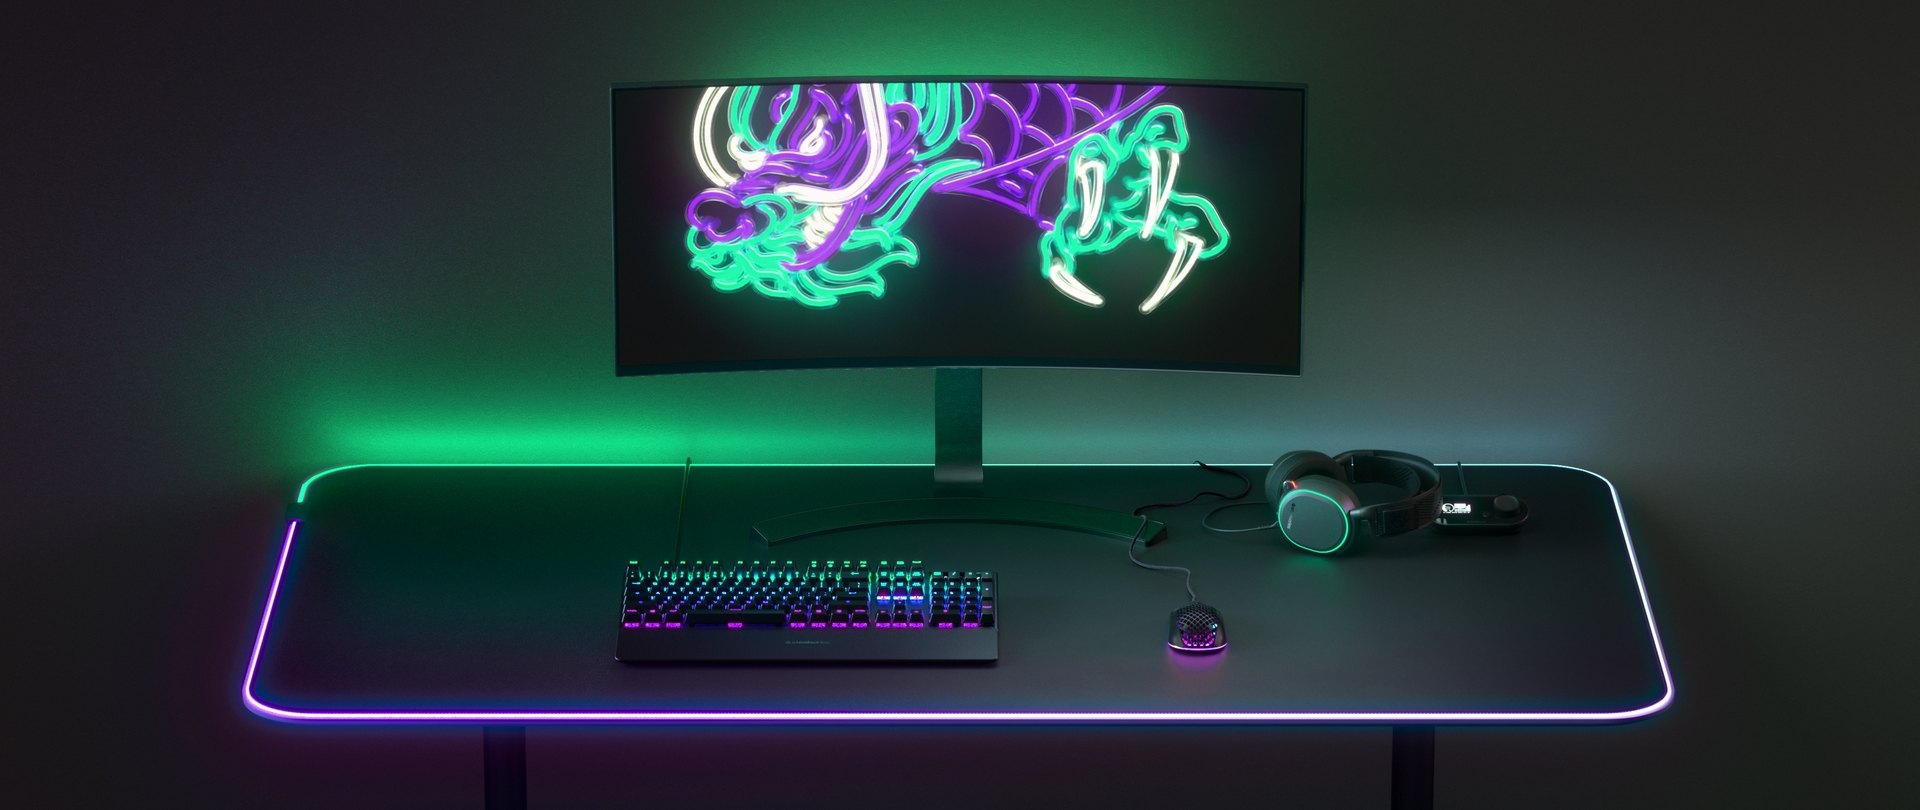 An full desktop setup, with an Apex Pro keyboard, Aerox 3 mouse and a Arctis Pro headset